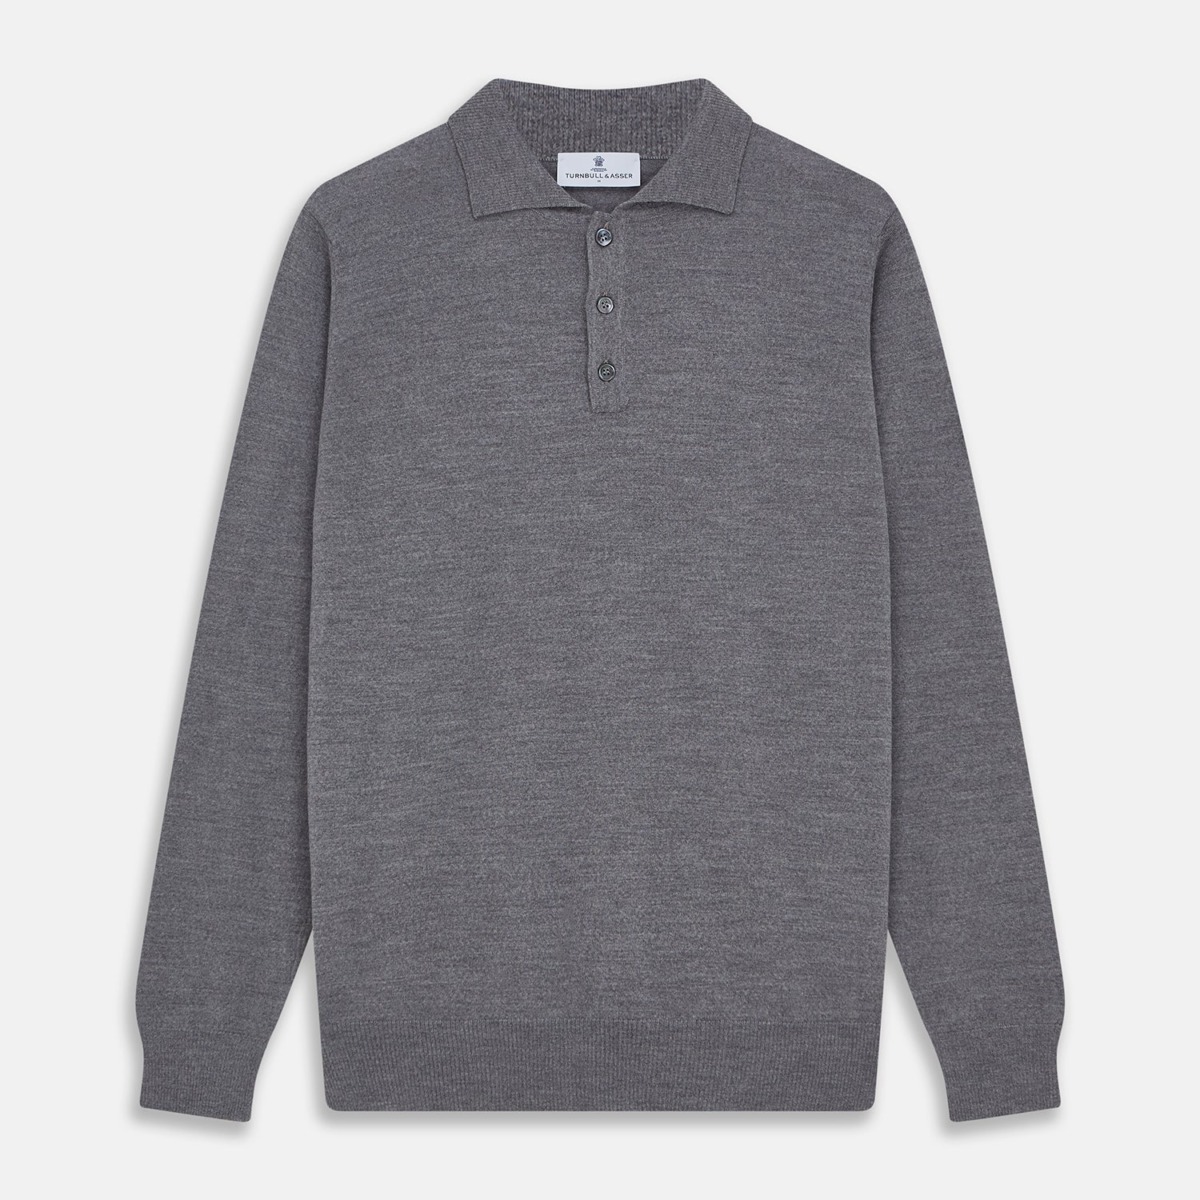 Gent Grey Poloshirt from Turnbull And Asser GOOFASH